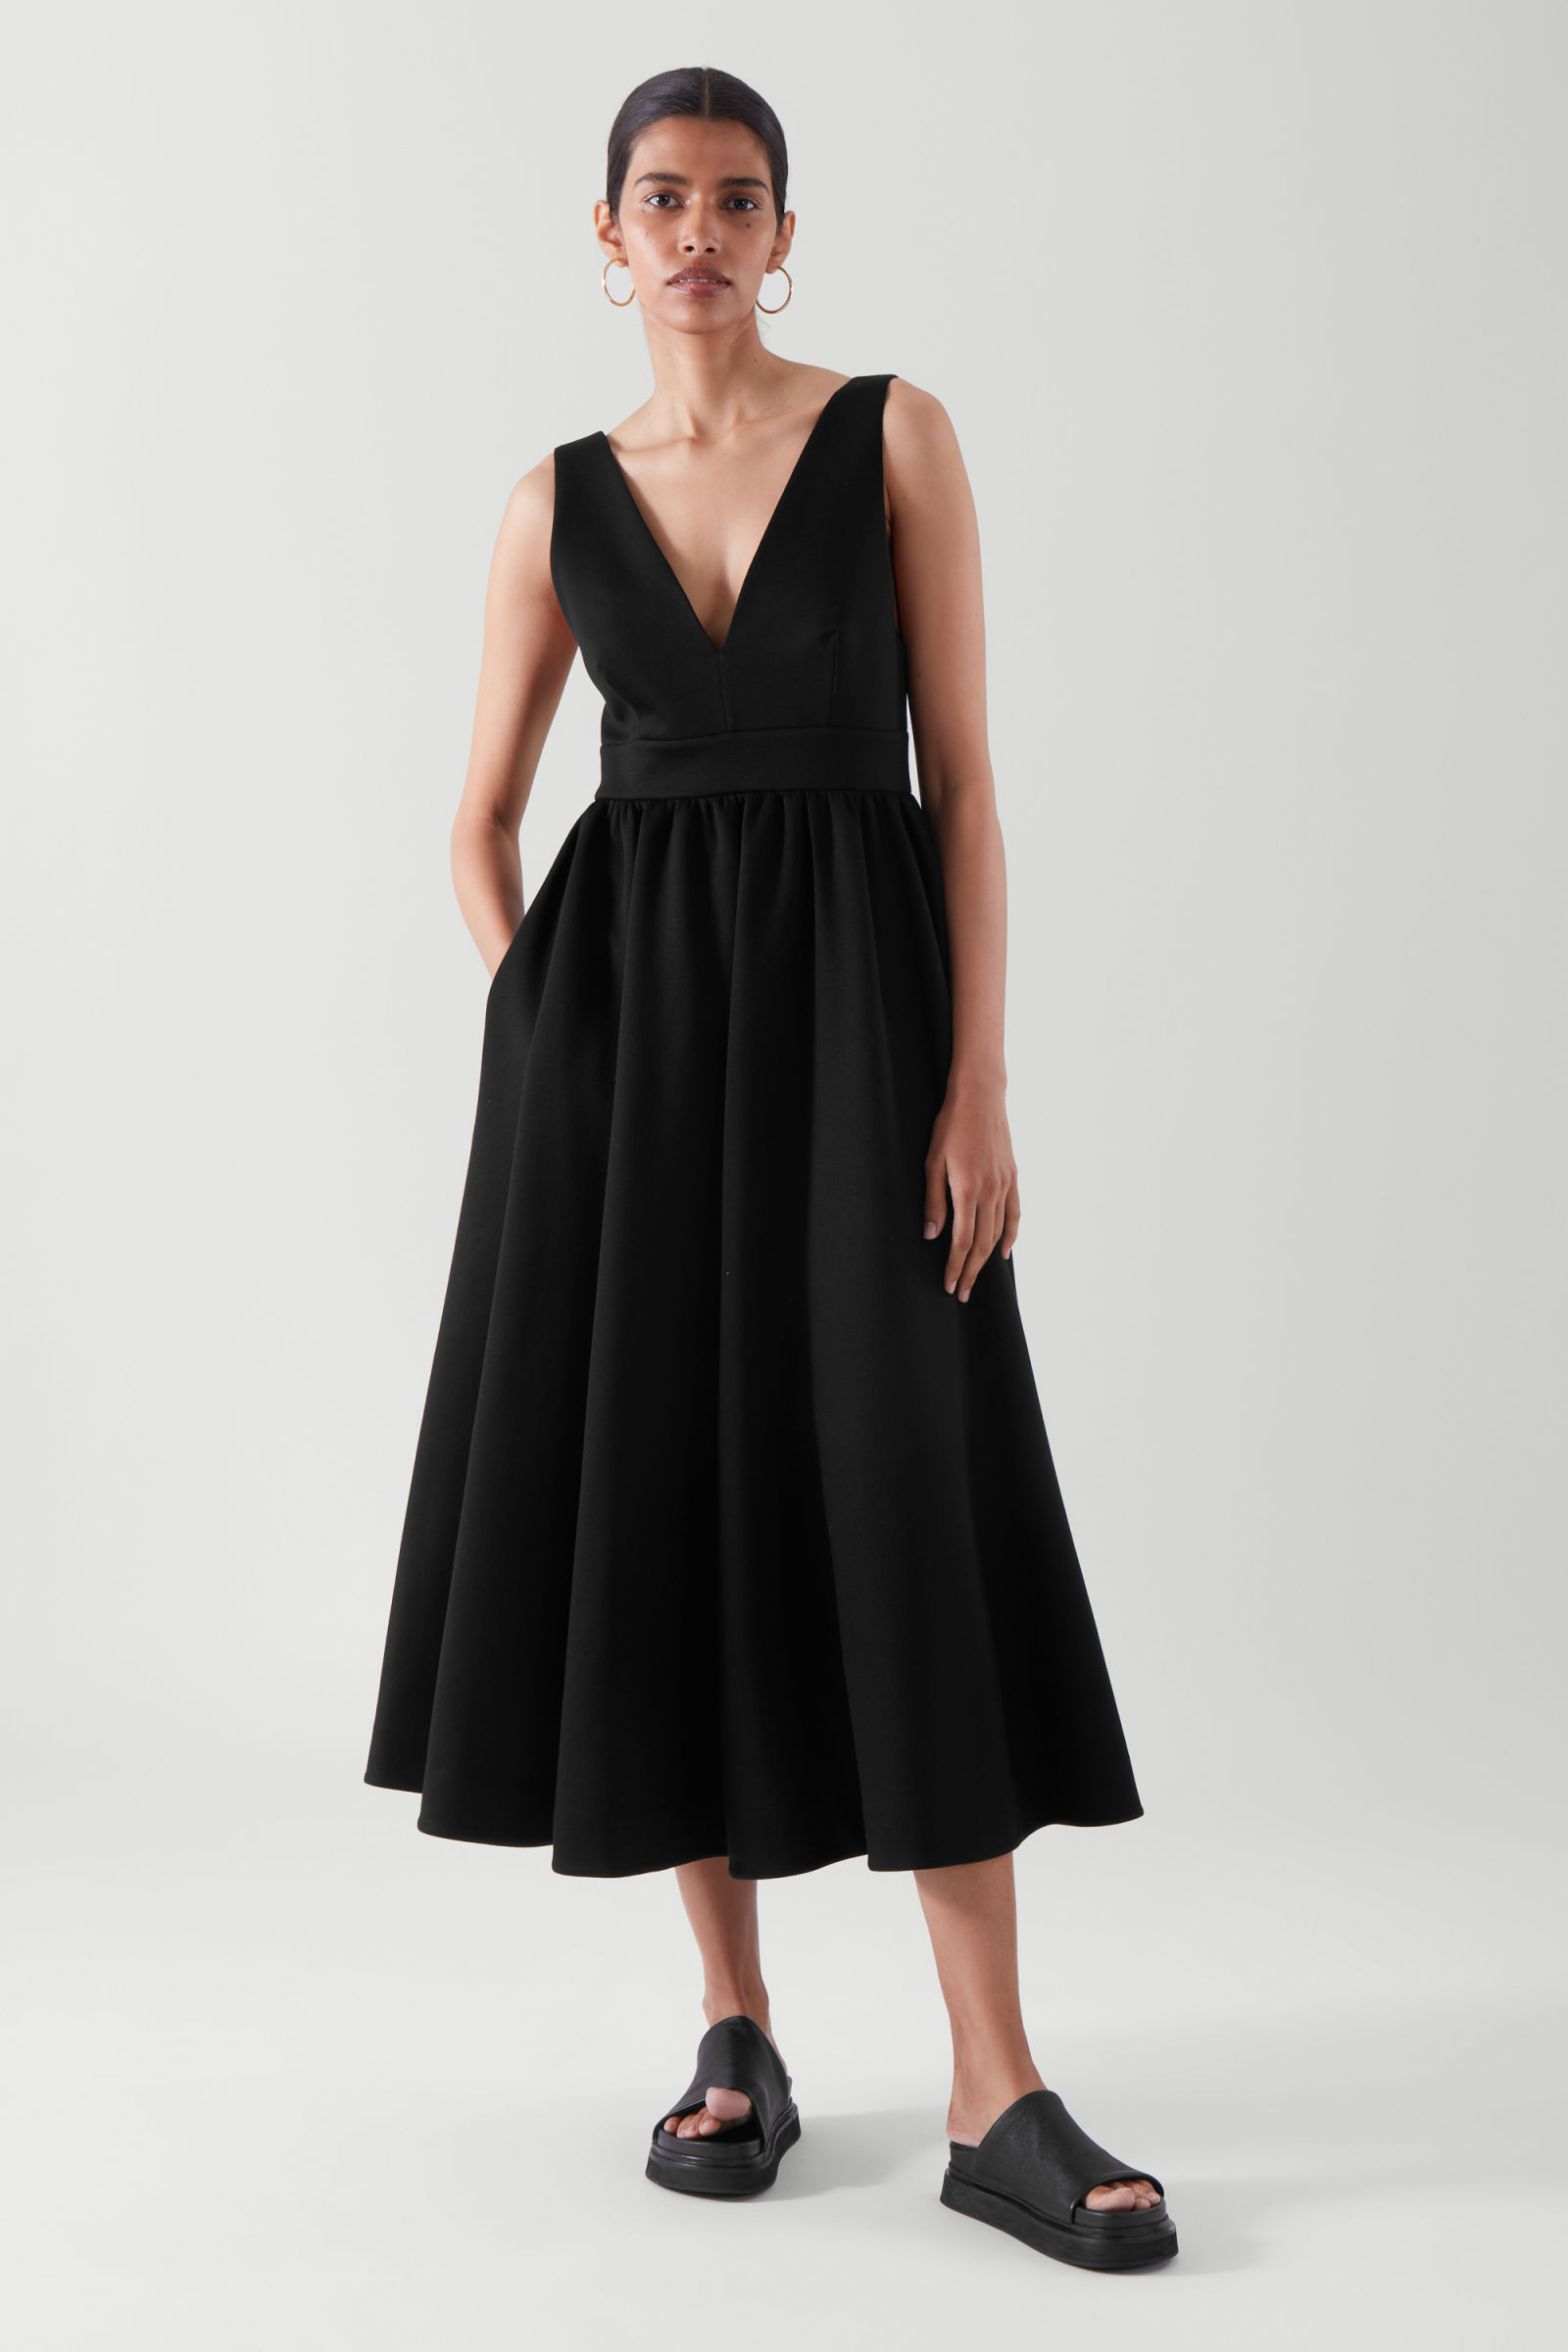 10 gorgeous dresses to nail wedding guest style this summer - VIP Magazine